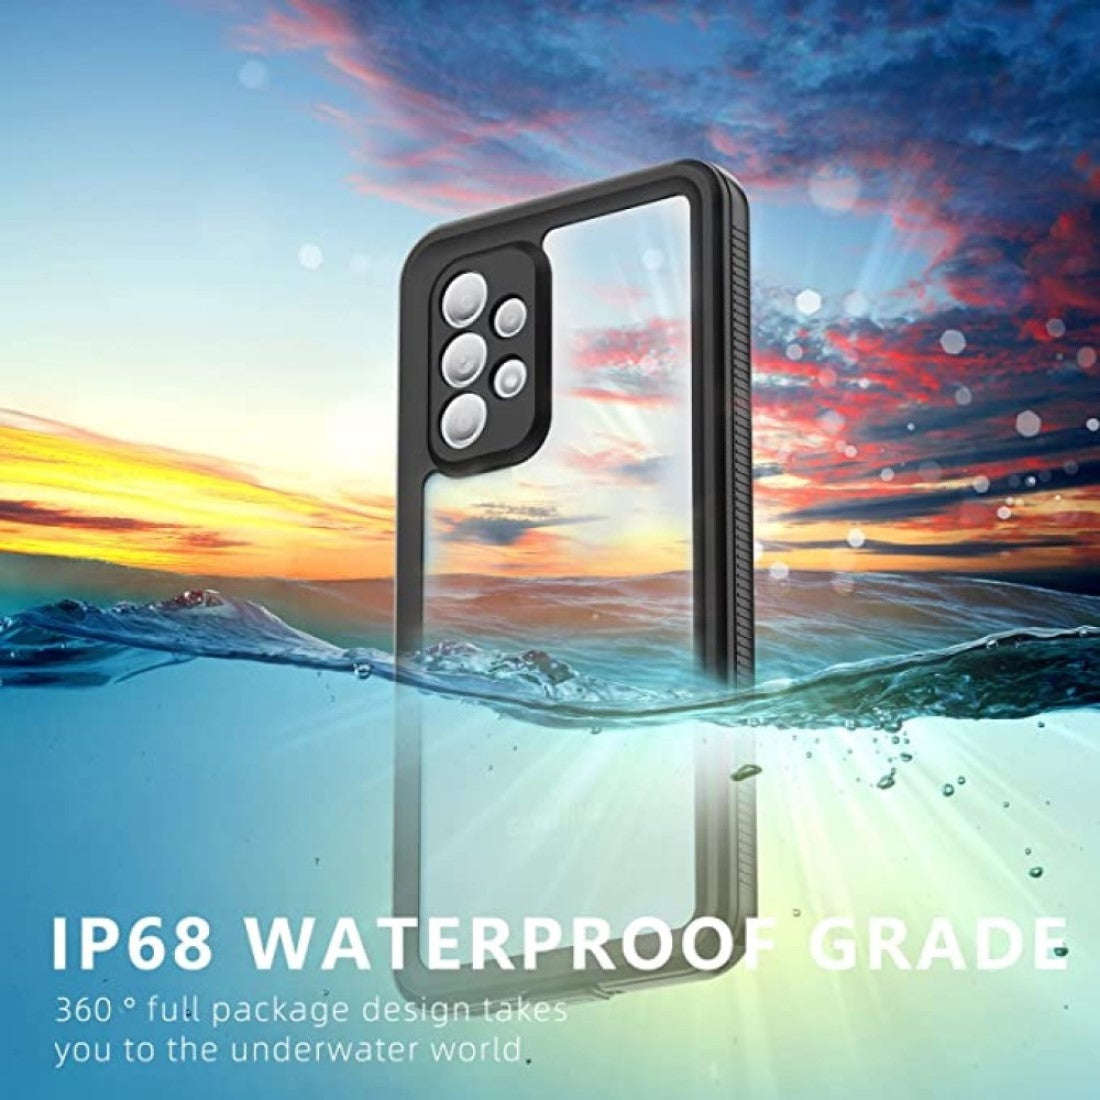 Waterproof Slim Life Proof Case for Samsung S21 Ultra Built-in Screen Protector Shockproof Dustproof Heavy Duty Full Body Protective Case